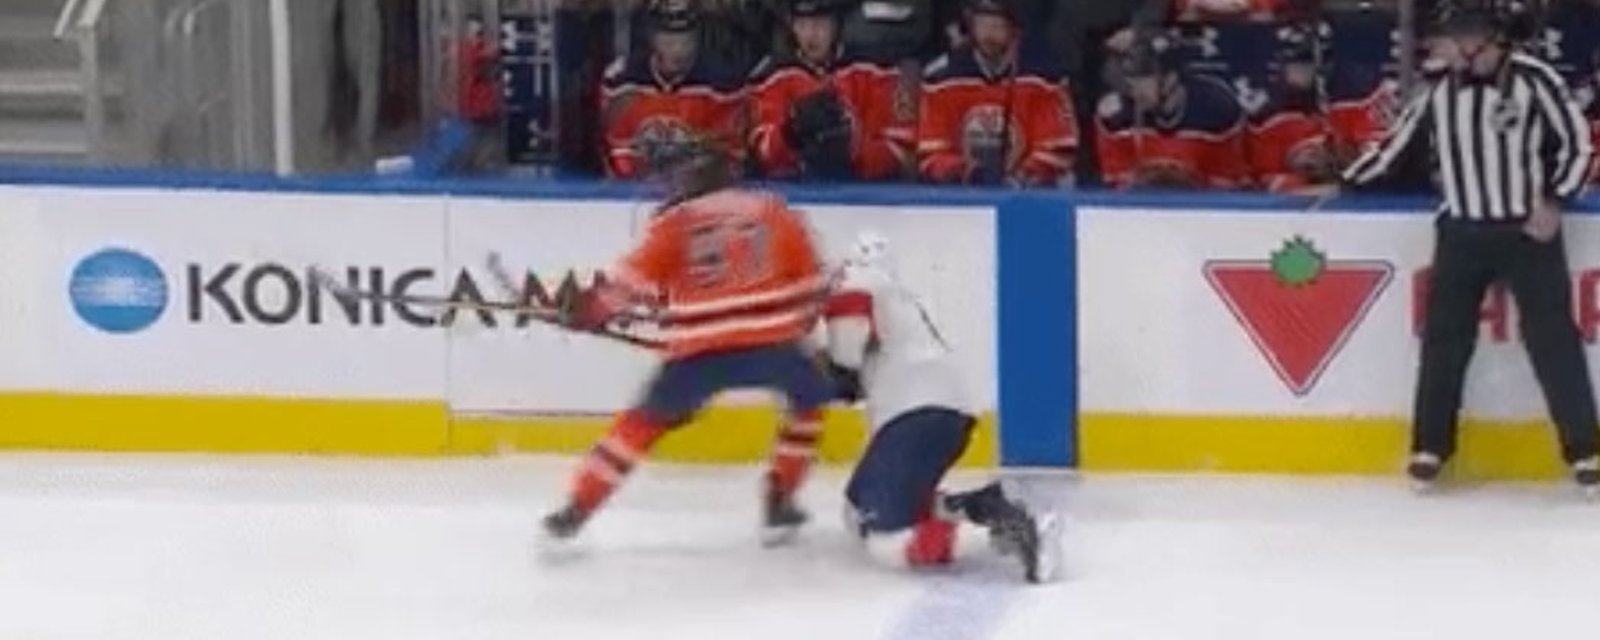 McDavid doesn't hold back and crushes a vulnerable Ekblad! 